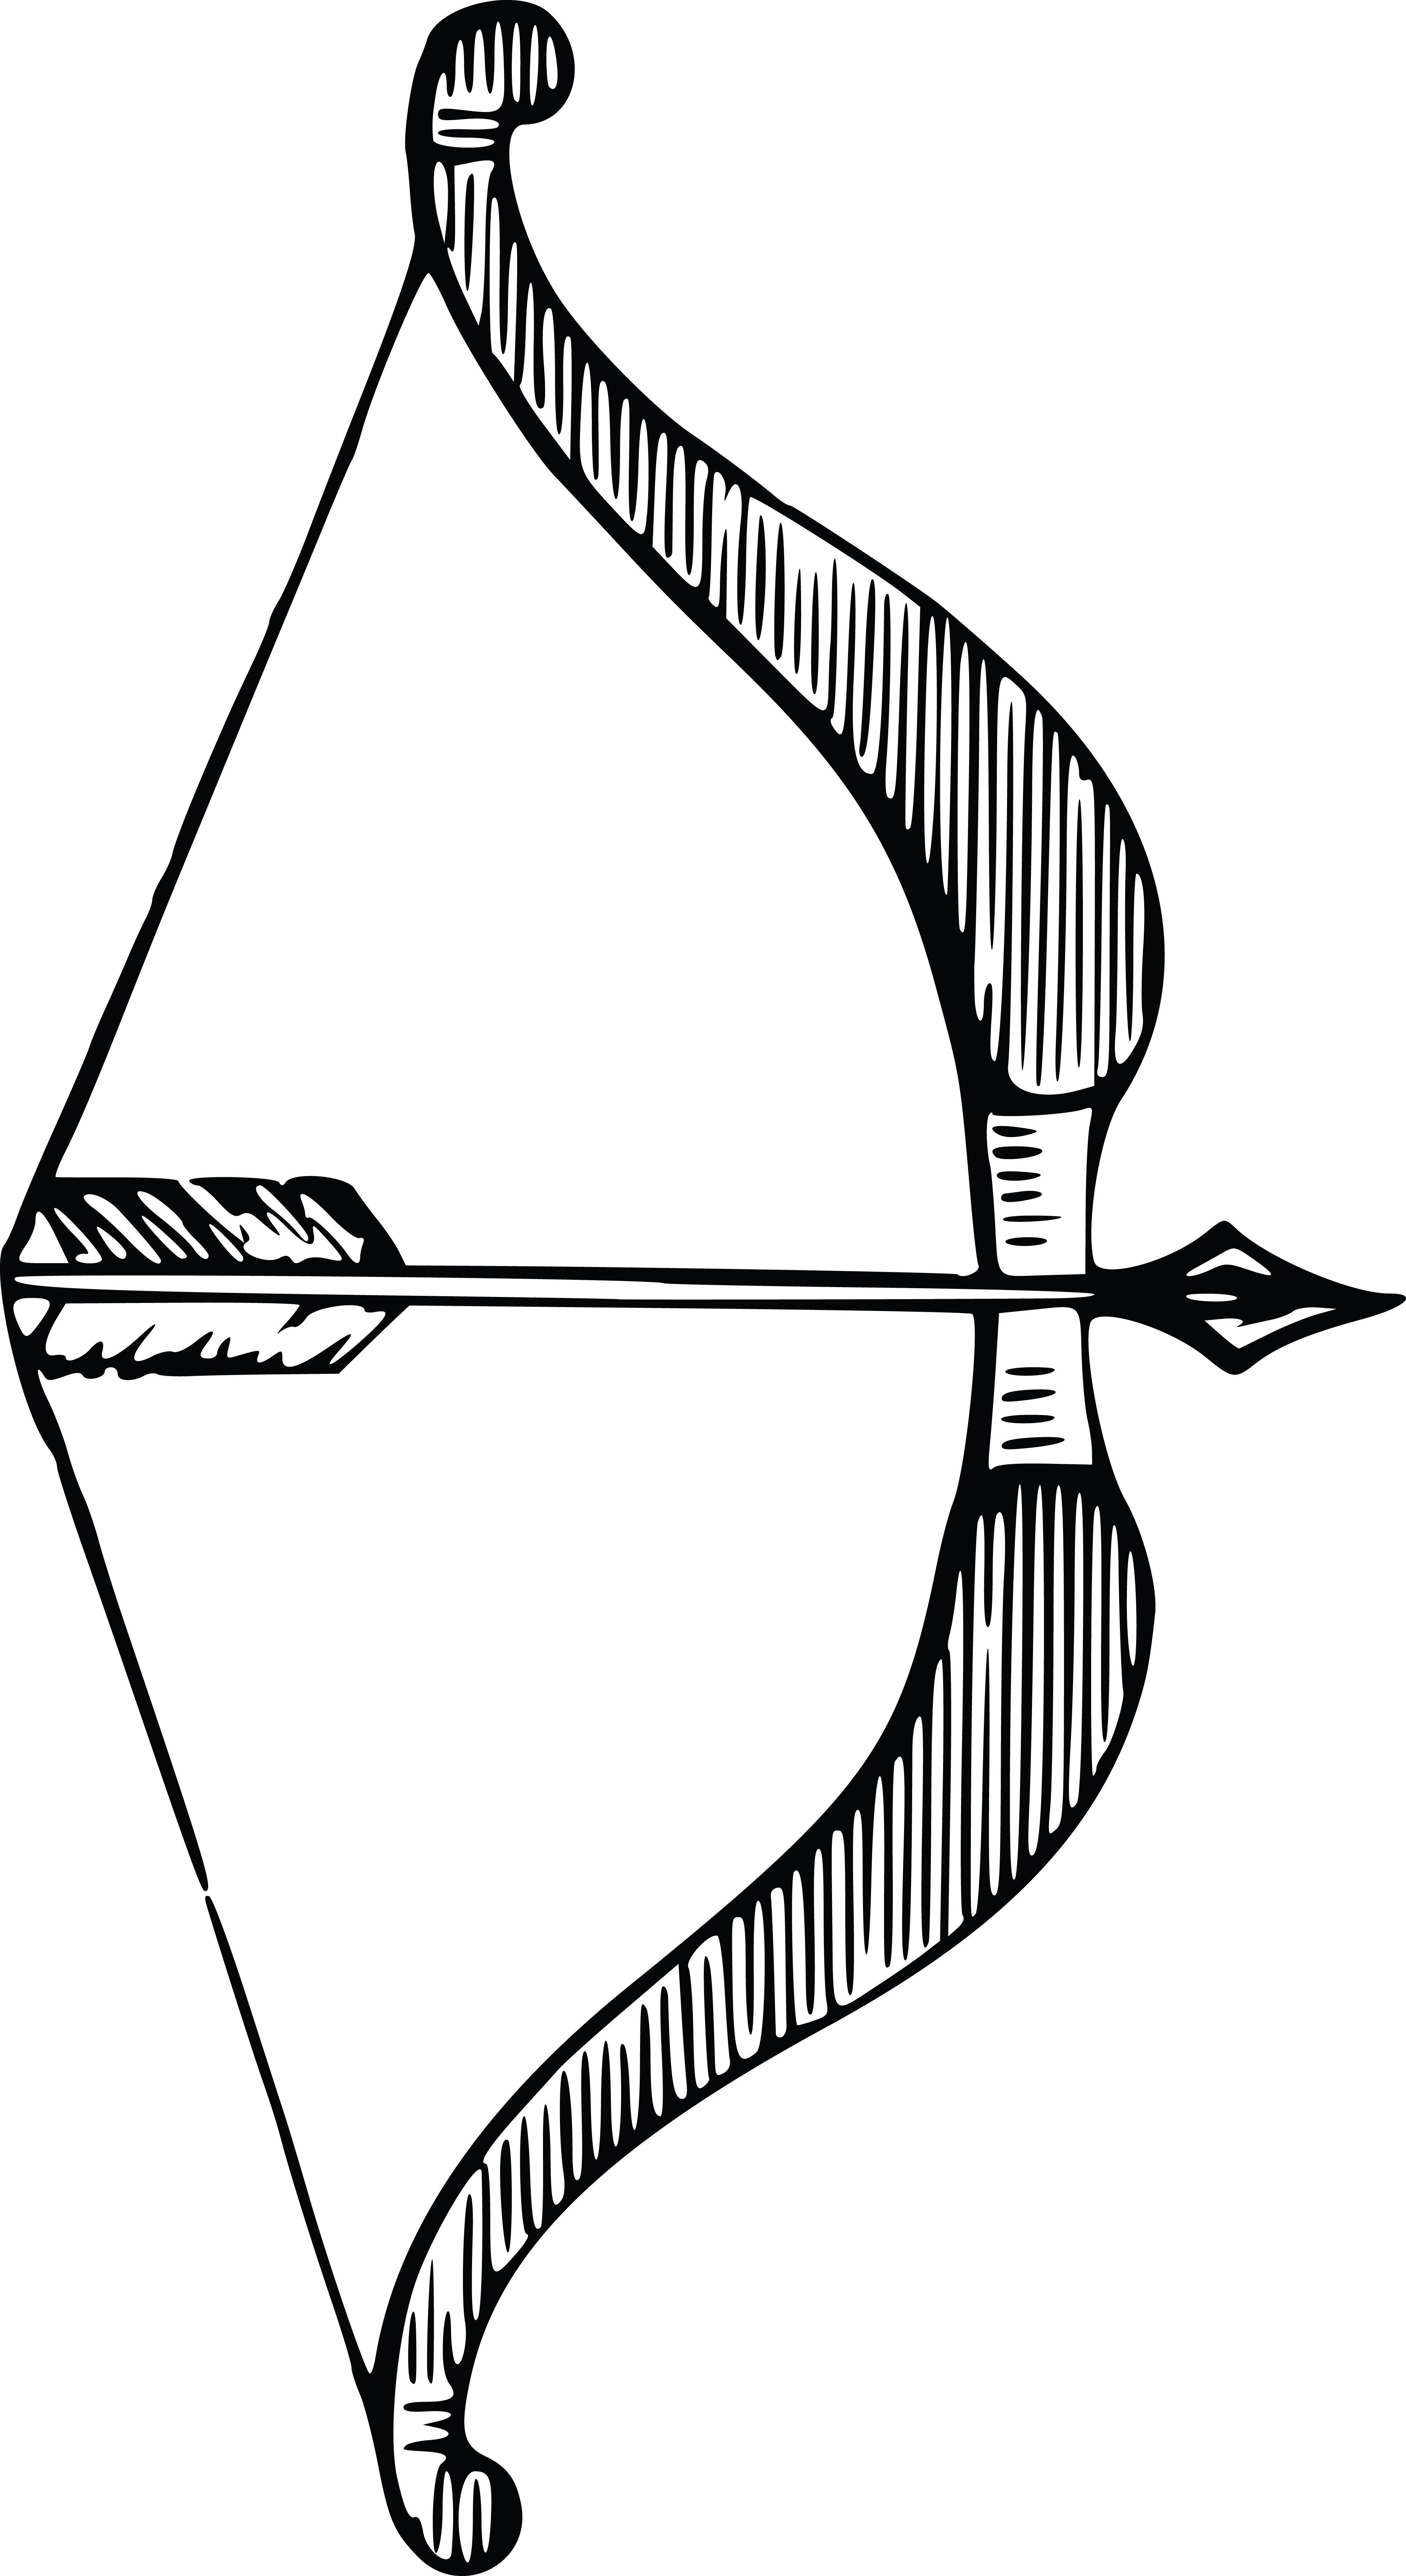 757 Bow And Arrow free clipart.